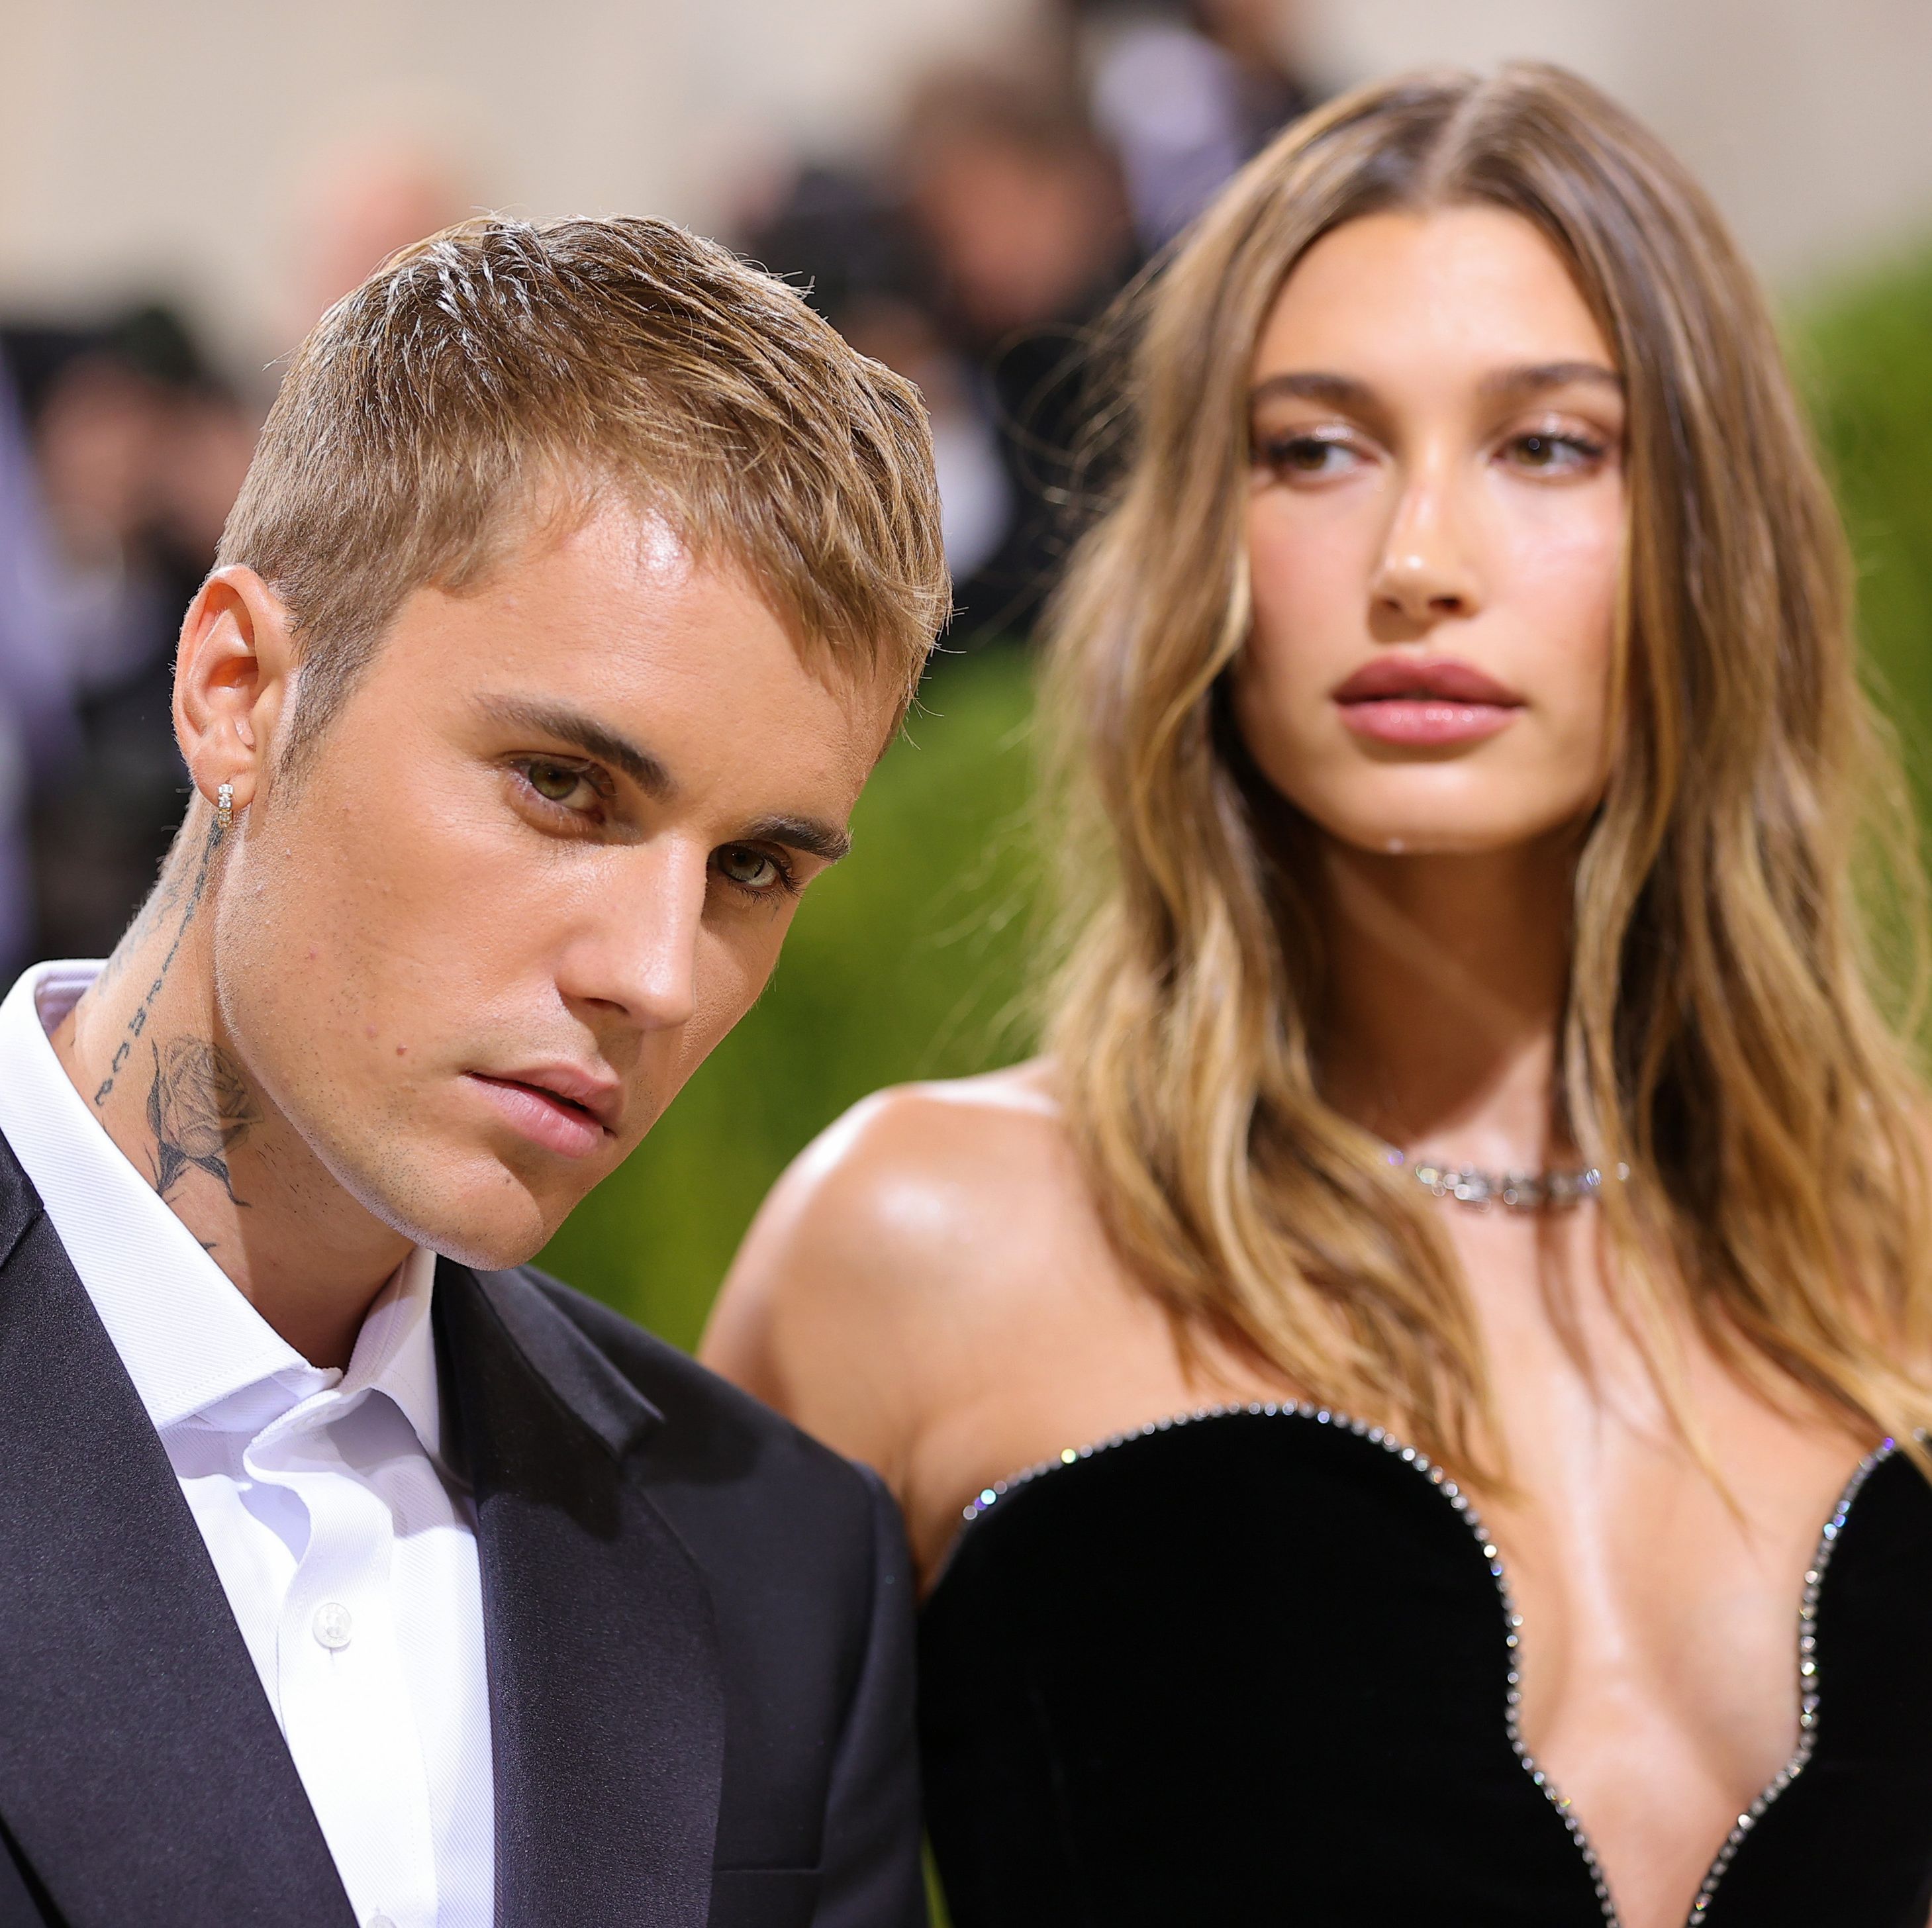 Hailey Bieber Wore a Little Black Latex Dress Out on a Date With Justin Bieber in London